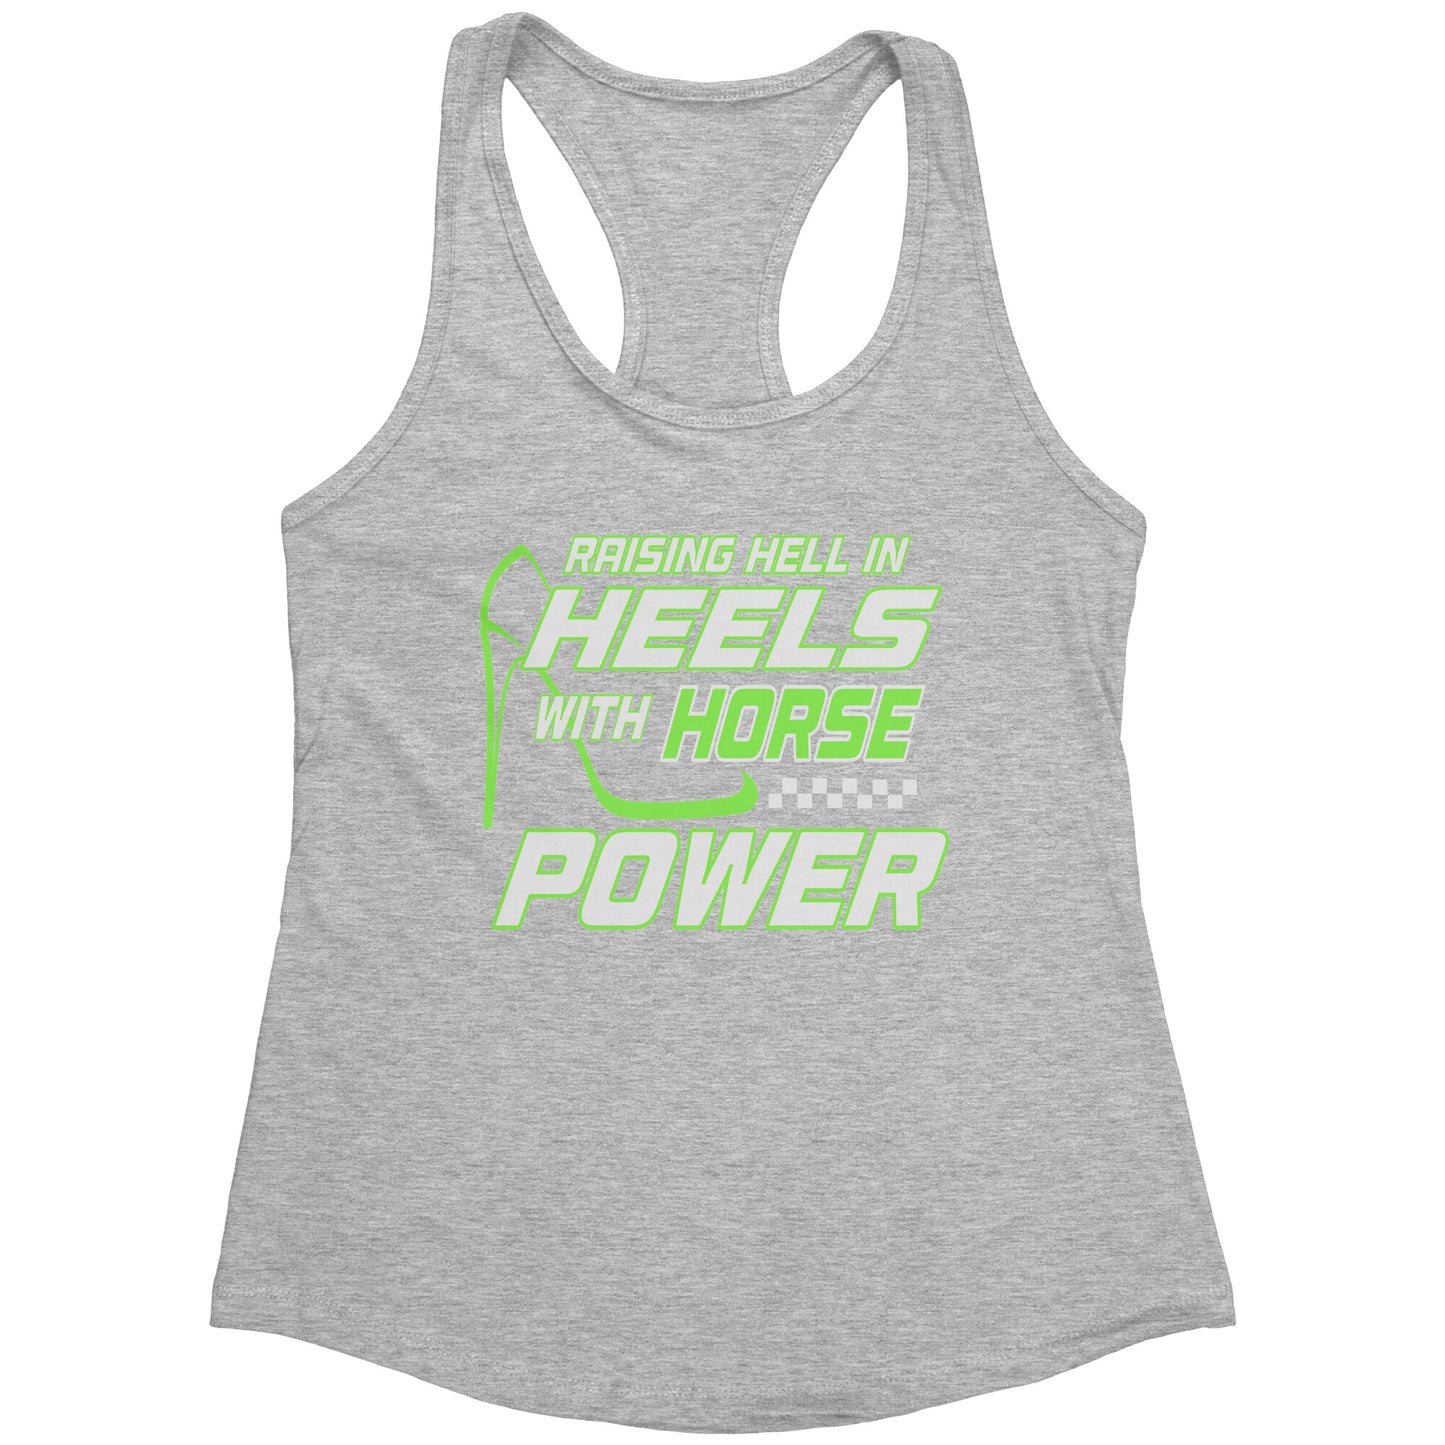 Raising Hell In Heels With Horsepower Tank Top